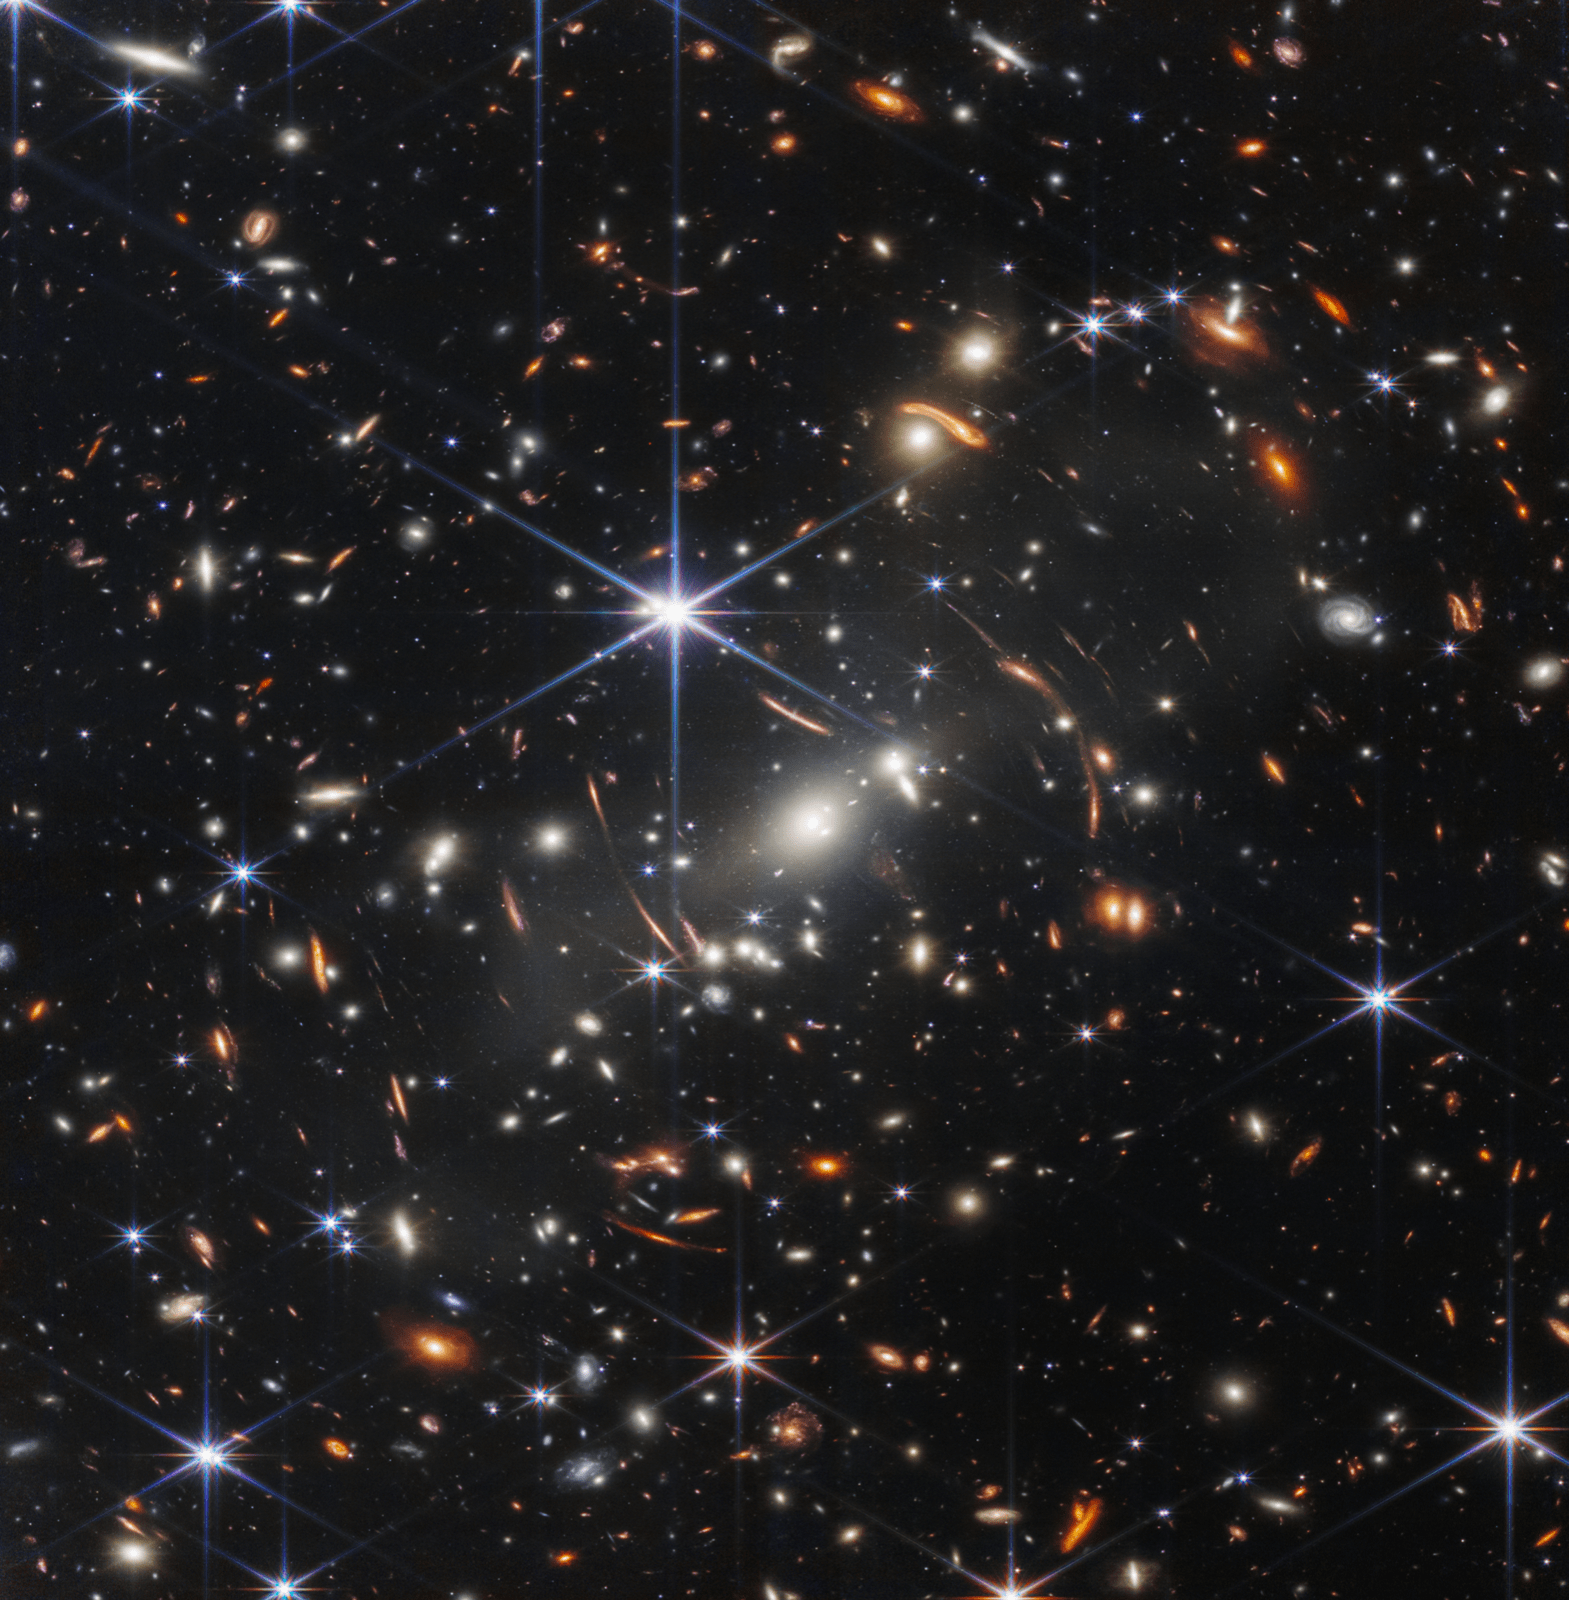 In this image, captured by JWST, has a background of space is black. Thousands of galaxies appear all across the view. Their shapes and colors vary. Some are various shades of orange, others are white. Most stars appear blue, and are sometimes as large as more distant galaxies that appear next to them. A very bright star is just above and left of center. It has eight bright blue, long diffraction spikes. Between 4 o’clock and 6 o’clock in its spikes are several very bright galaxies. A group of three are in the middle, and two are closer to 4 o’clock. These galaxies are part of the galaxy cluster SMACS 0723, and they are warping the appearances of galaxies seen around them. Long orange arcs appear at left and right toward the center.